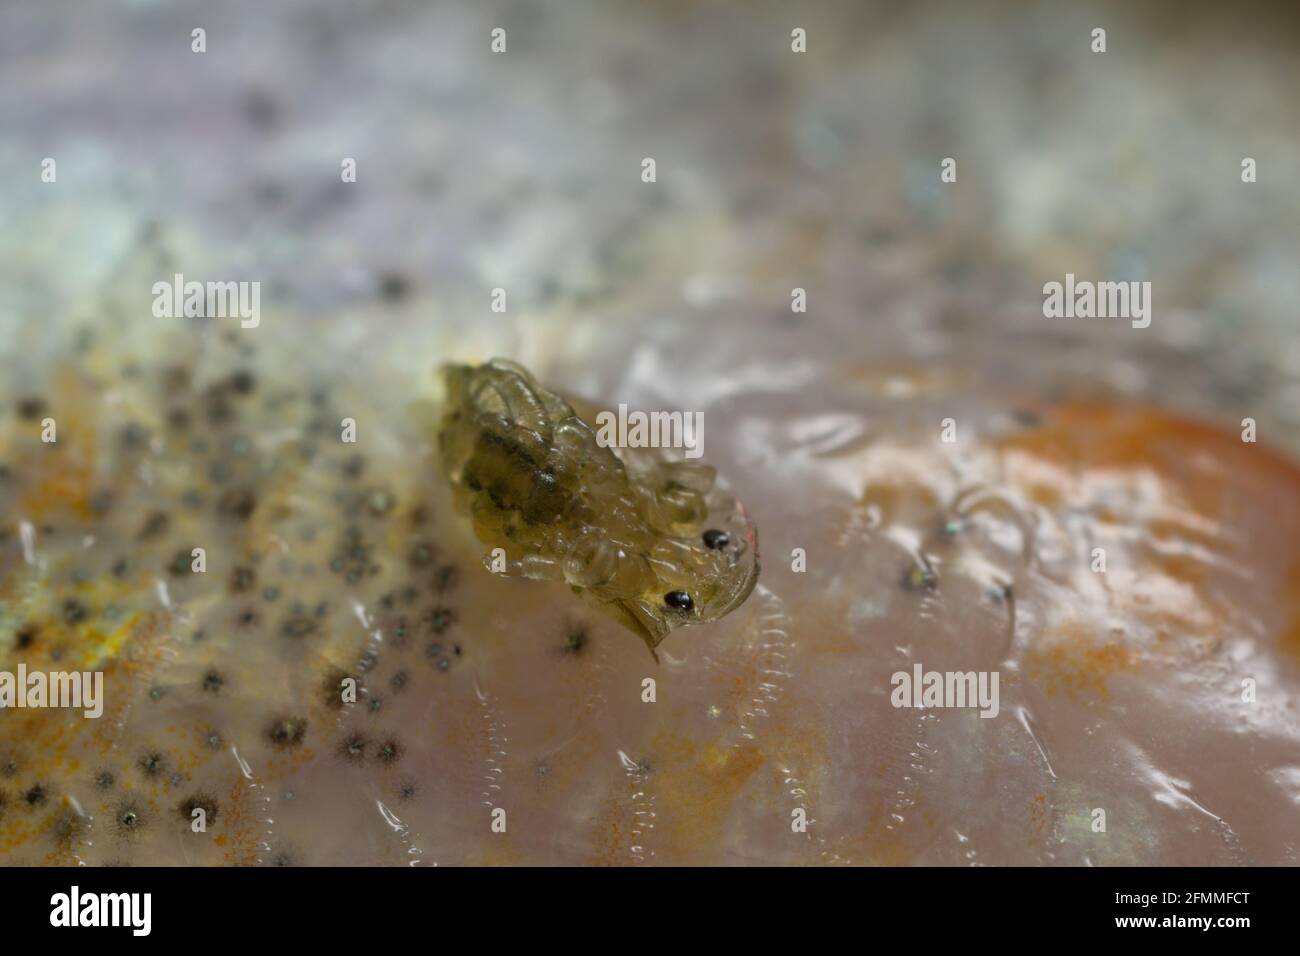 Common fish louse, Argulus foliaceus on perch photographed with high magnifcation Stock Photo